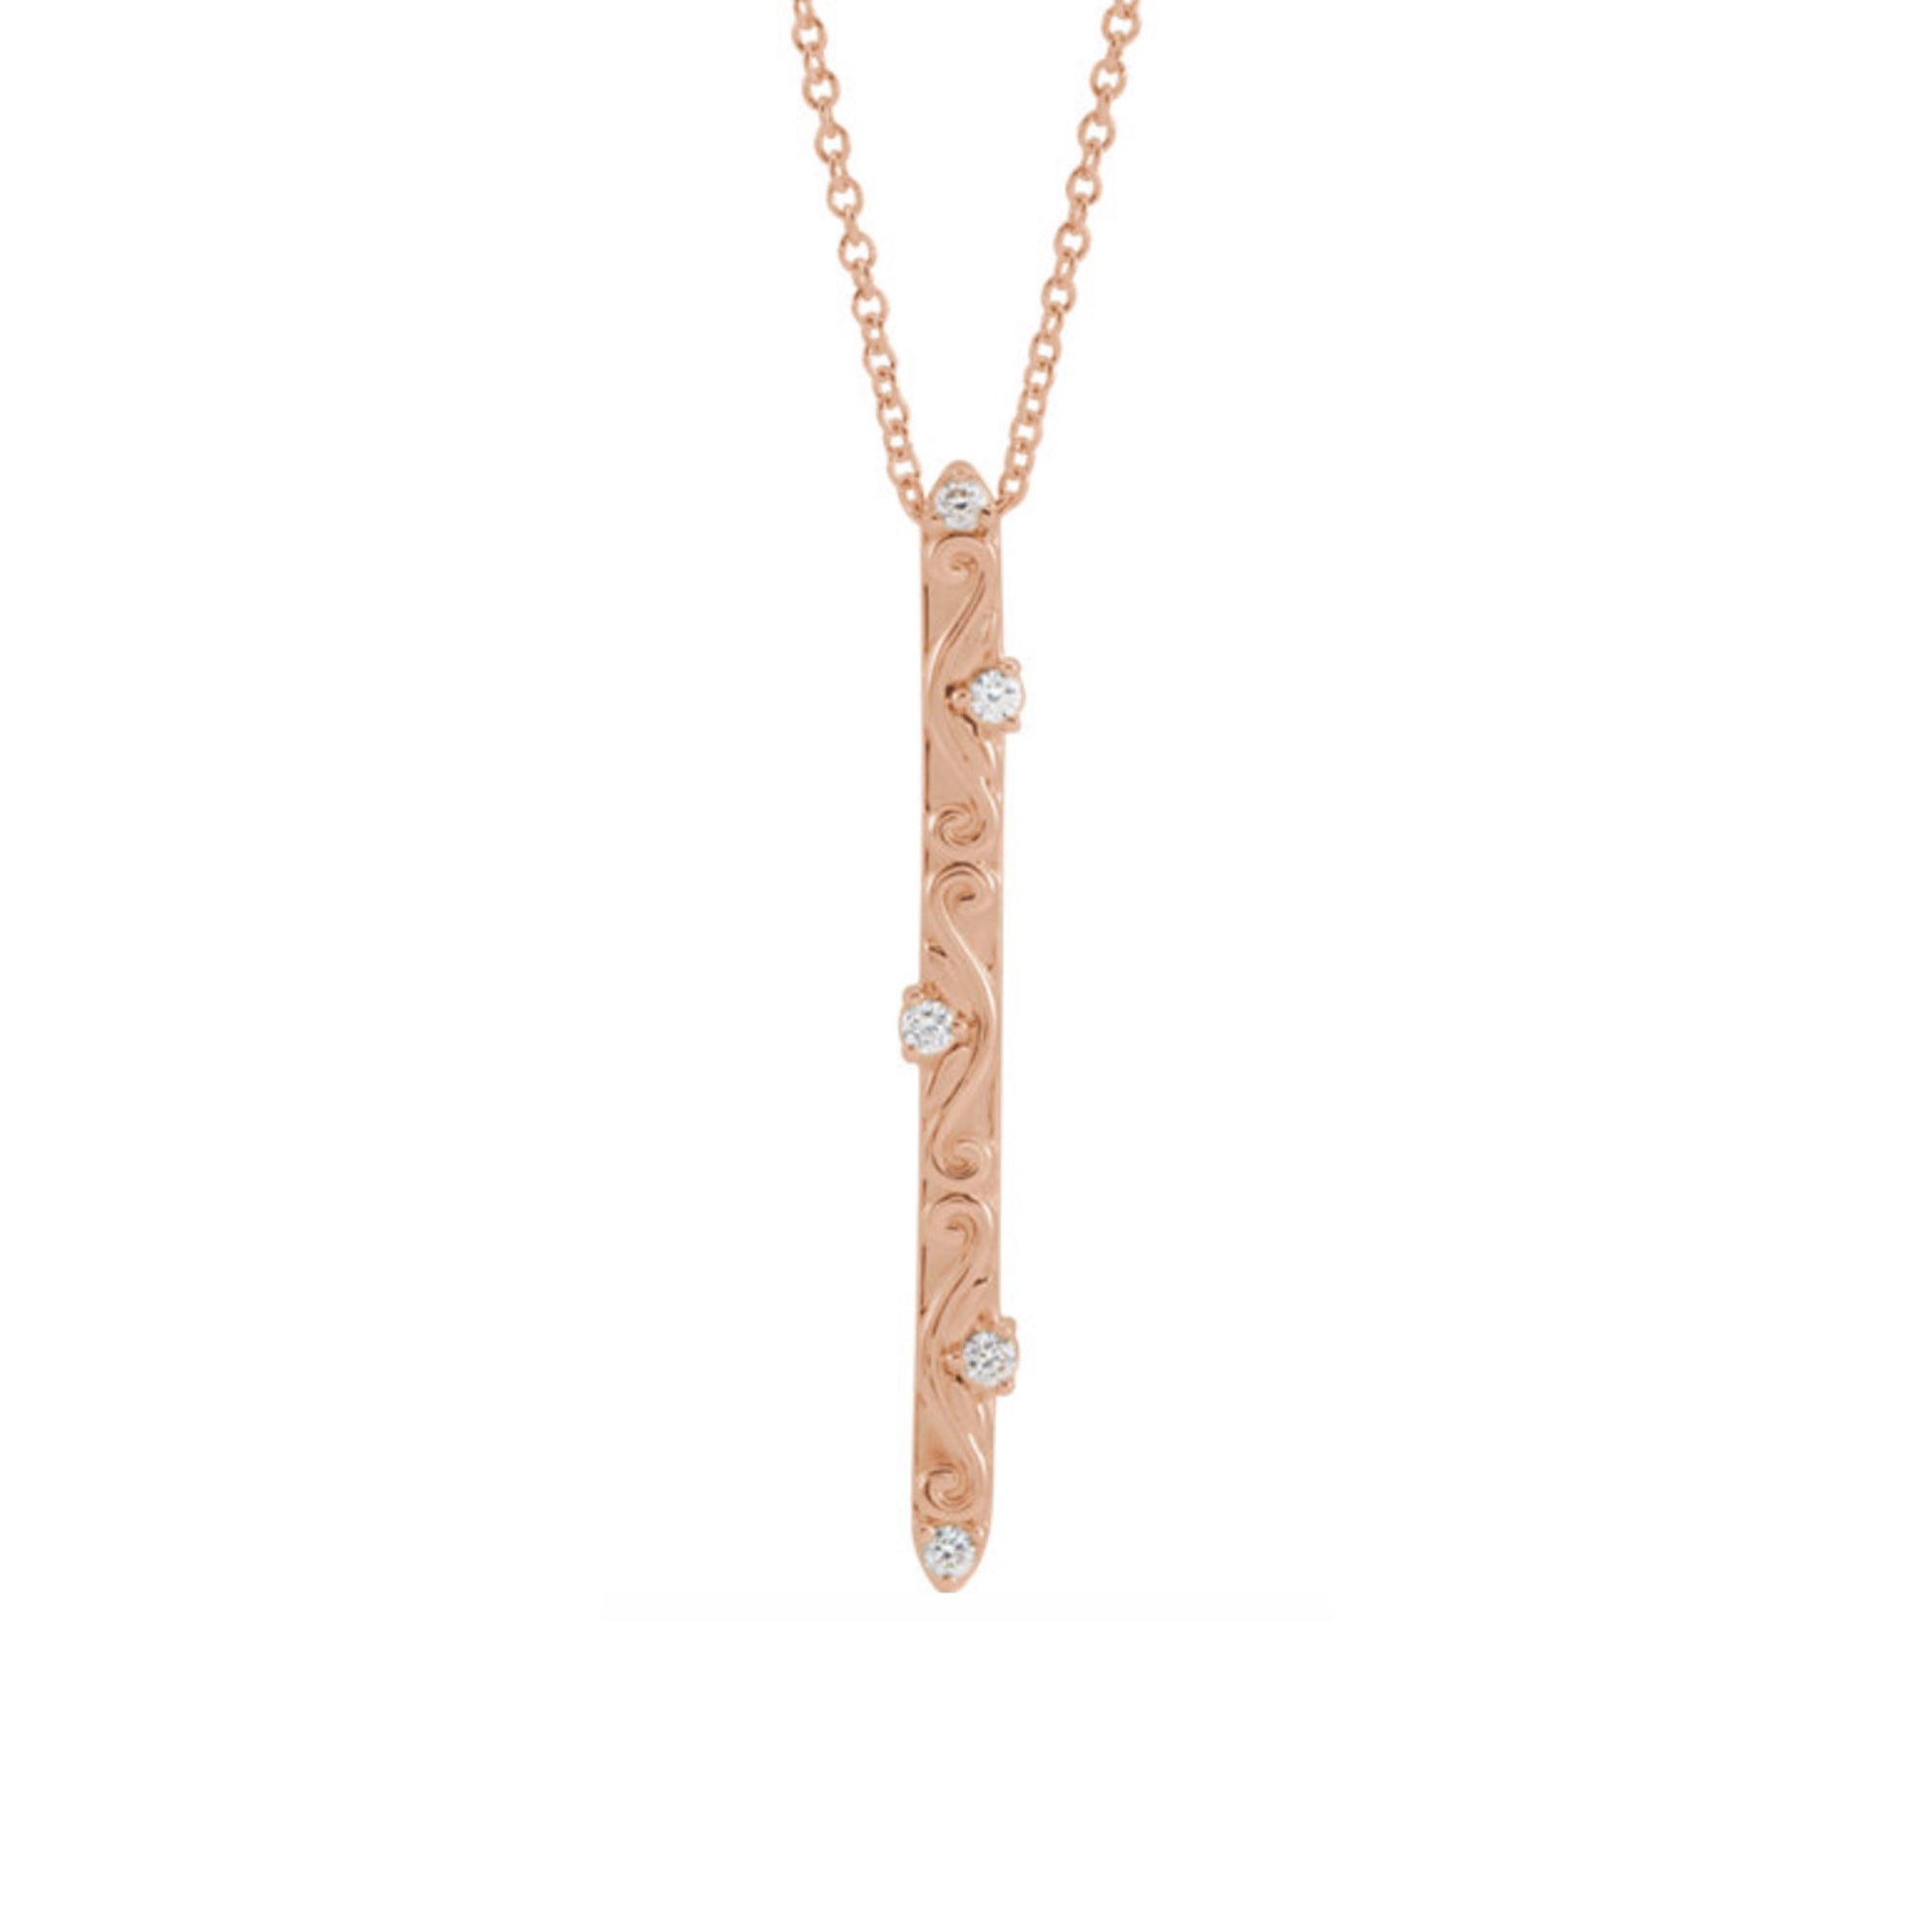 Vintage Inspired Vertical Diamond Bar Necklace - Talisman Collection Fine Jewelers